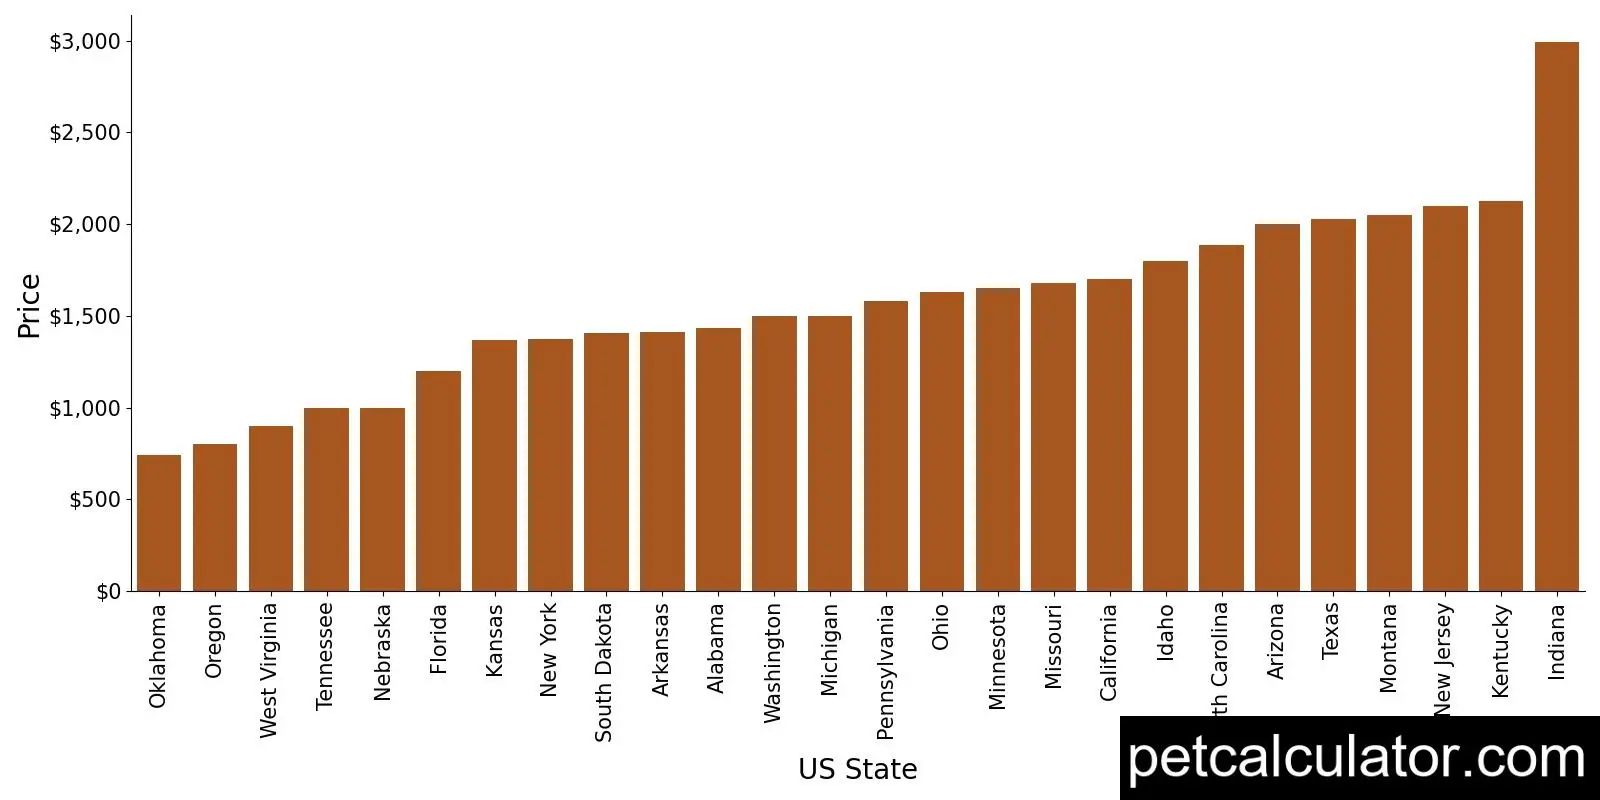 Price of Scottish Terrier by US State 